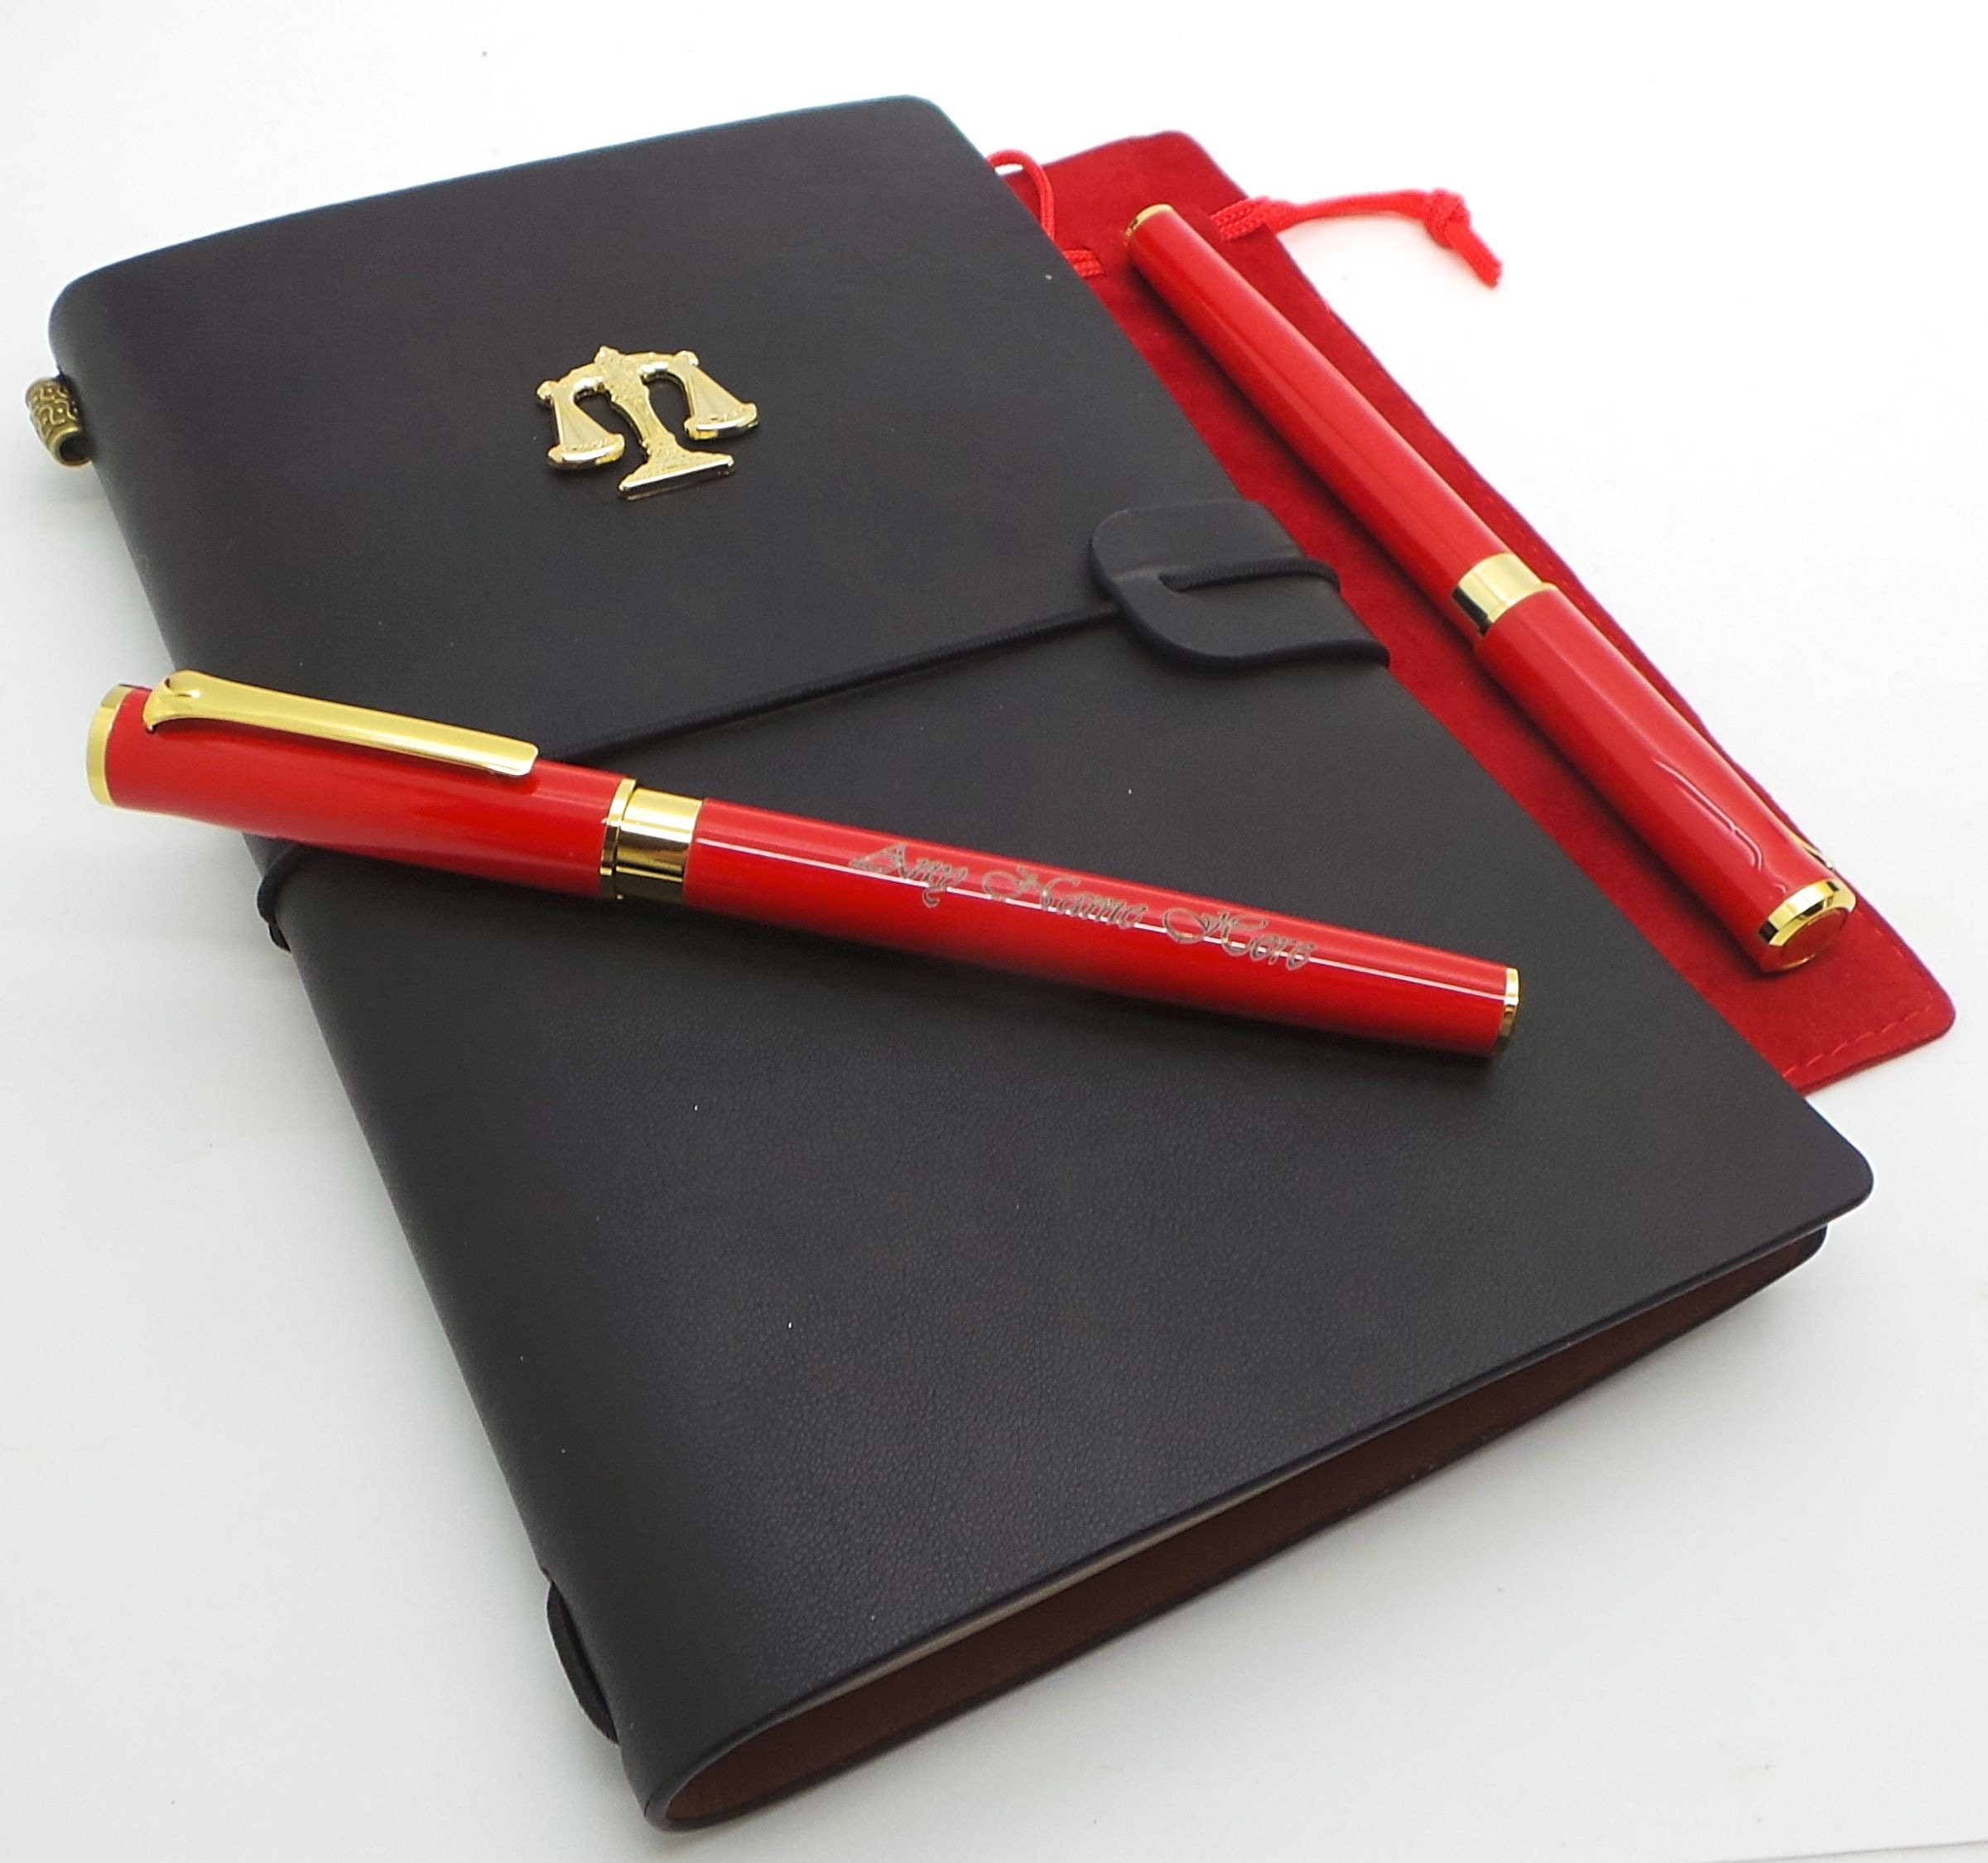 Premium Gifts, Engraved - Expensive Pens & Journals